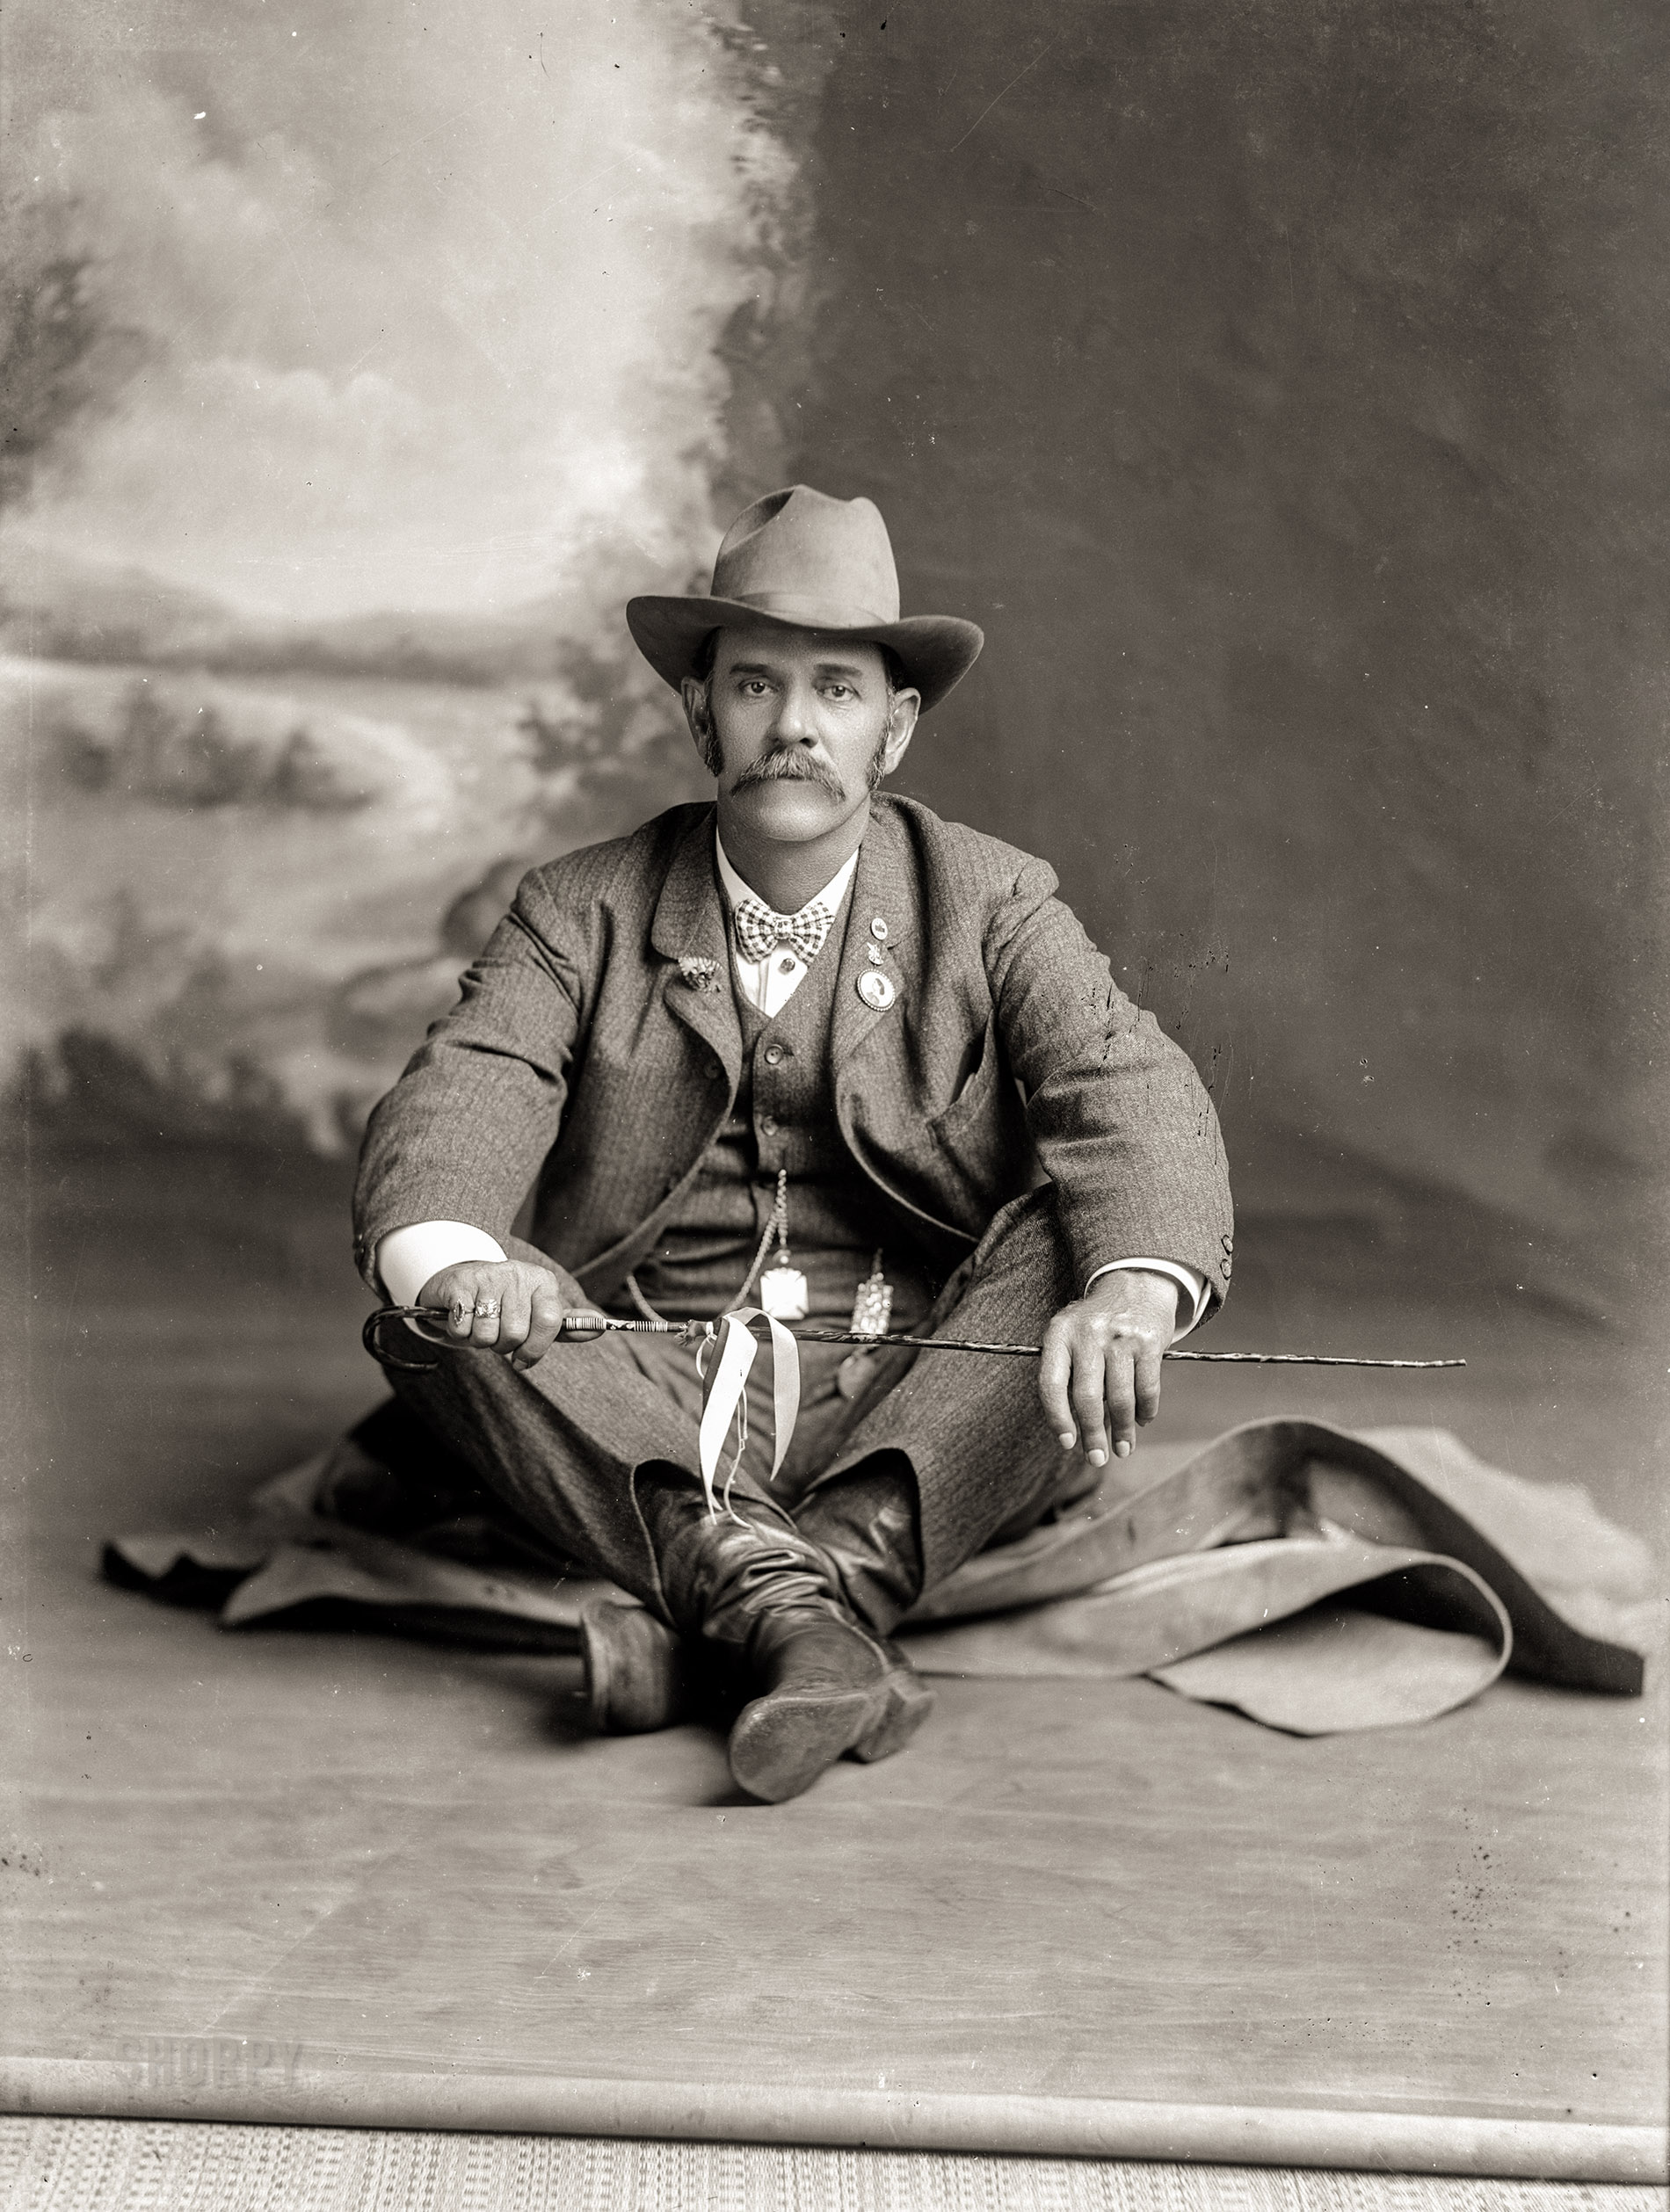 Circa 1902. "Sam Peths [?]." 5x7 inch glass negative from the C.M. Bell portrait studio in Washington, D.C. View full size.